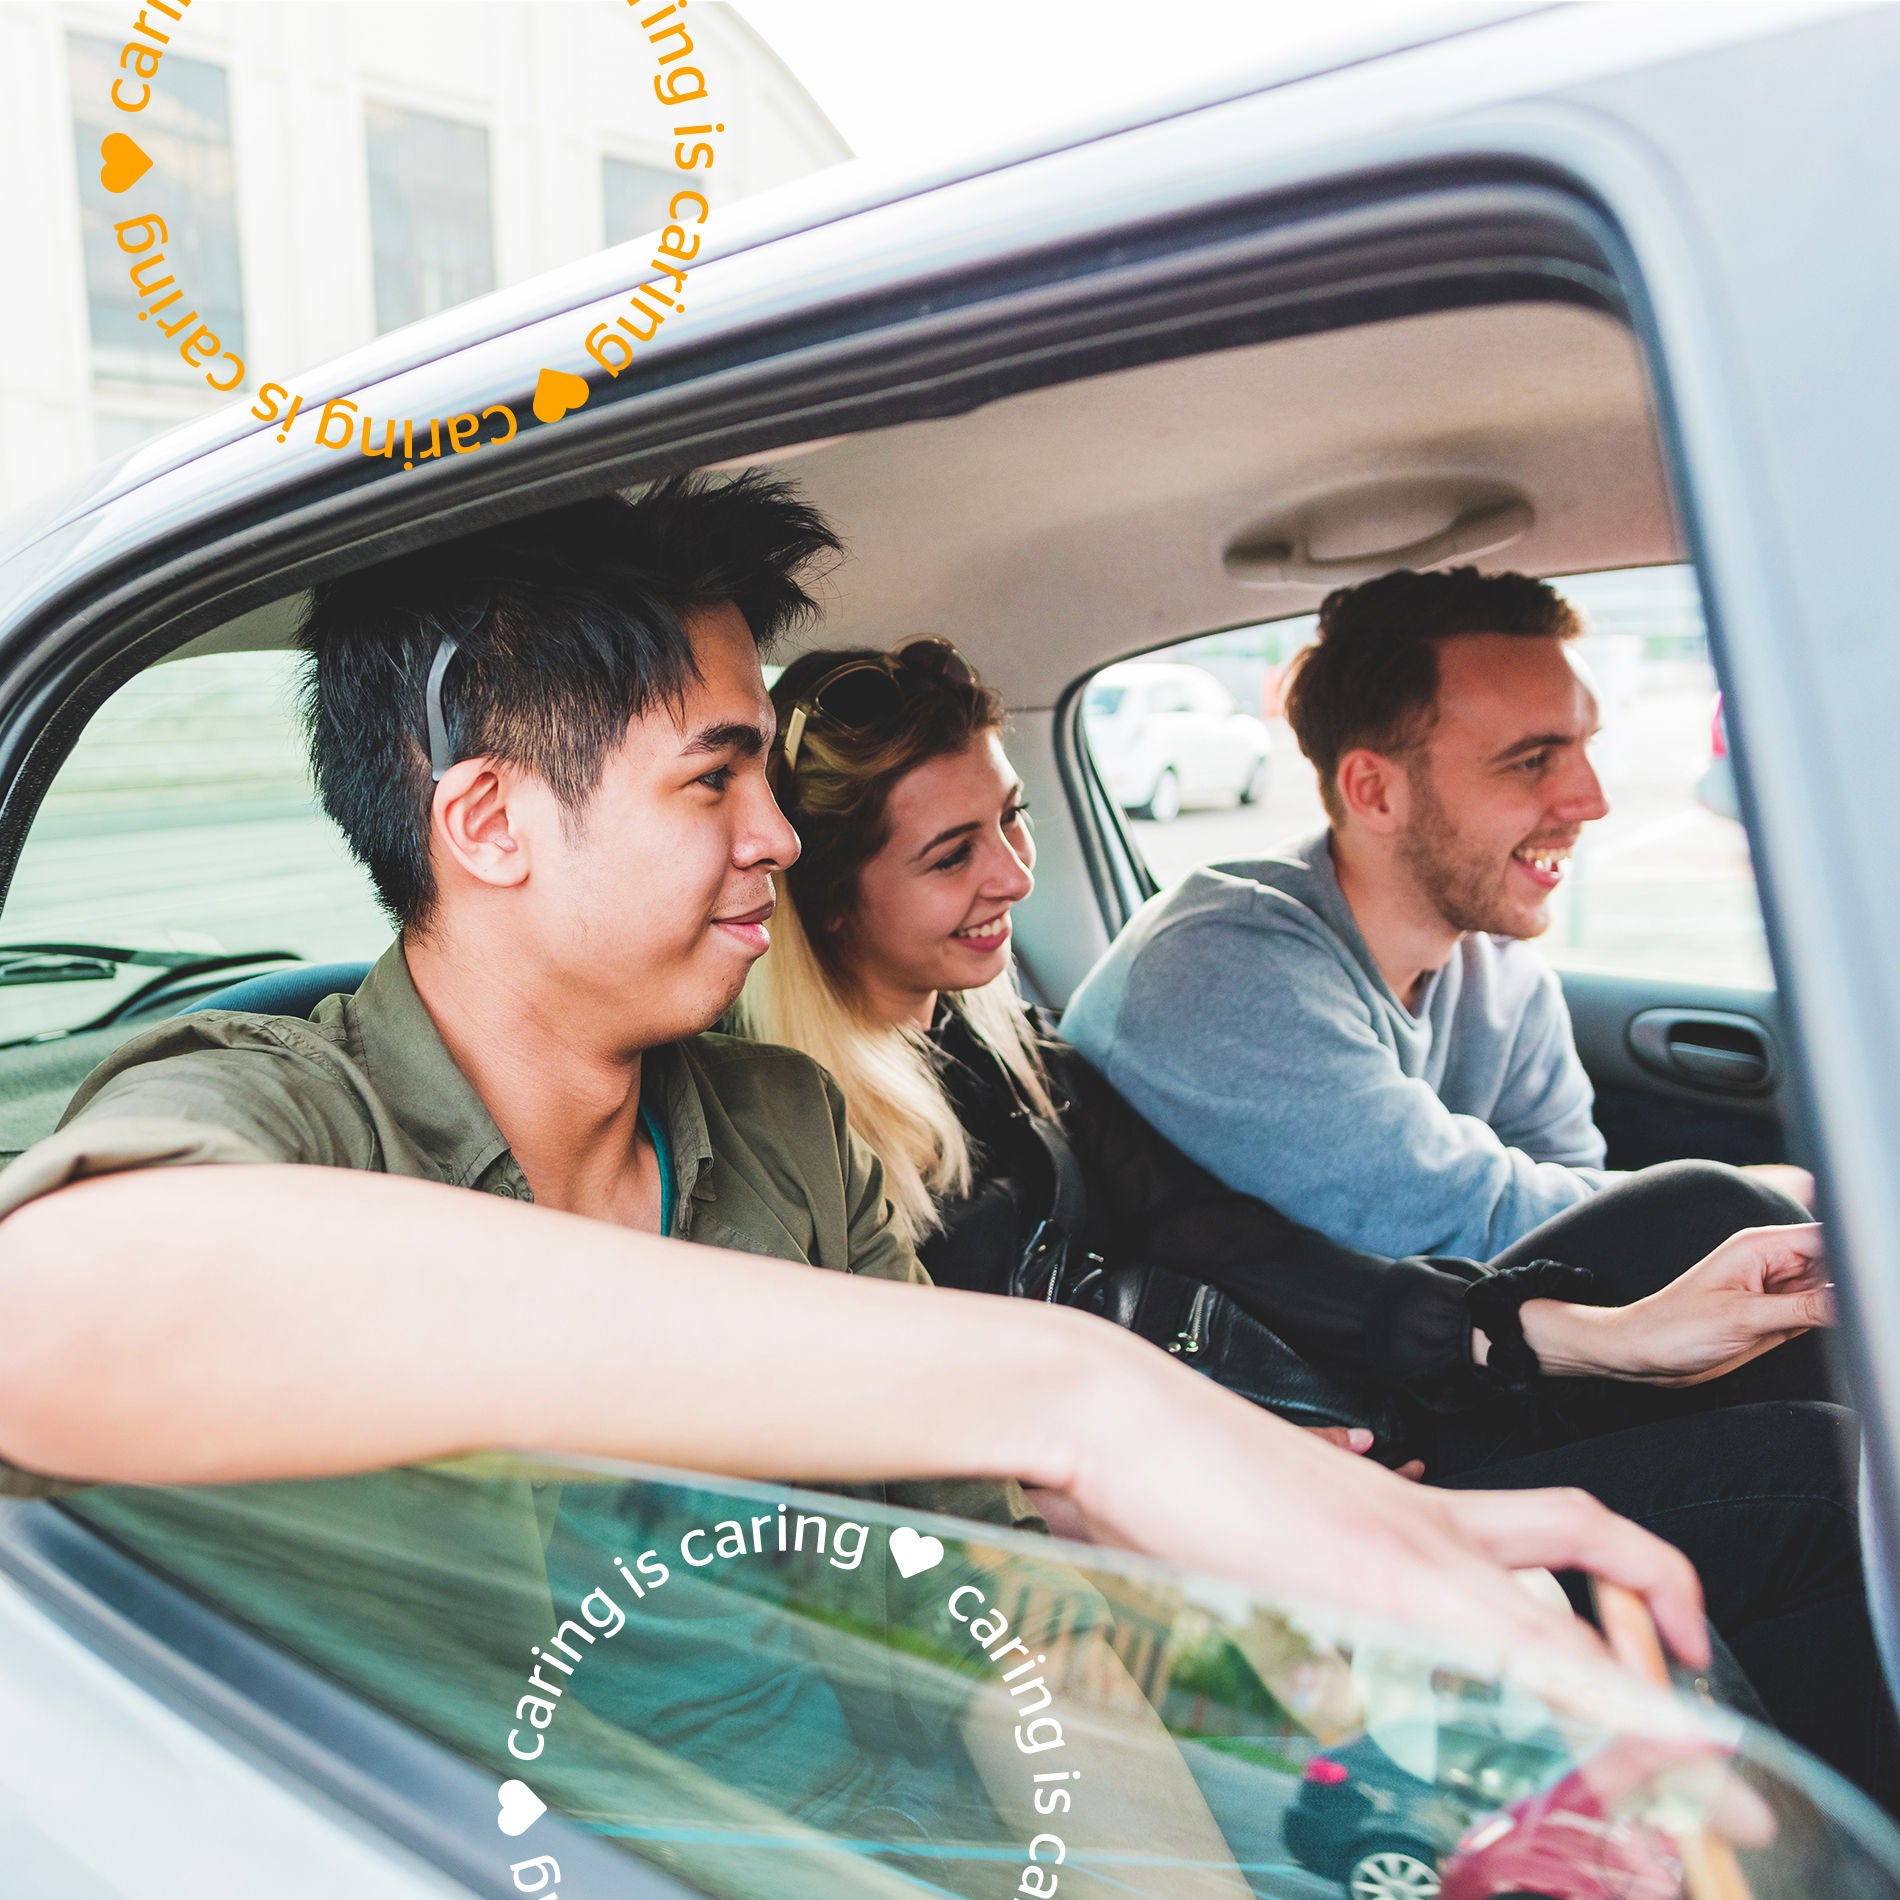 Shared mobility solution carpooling